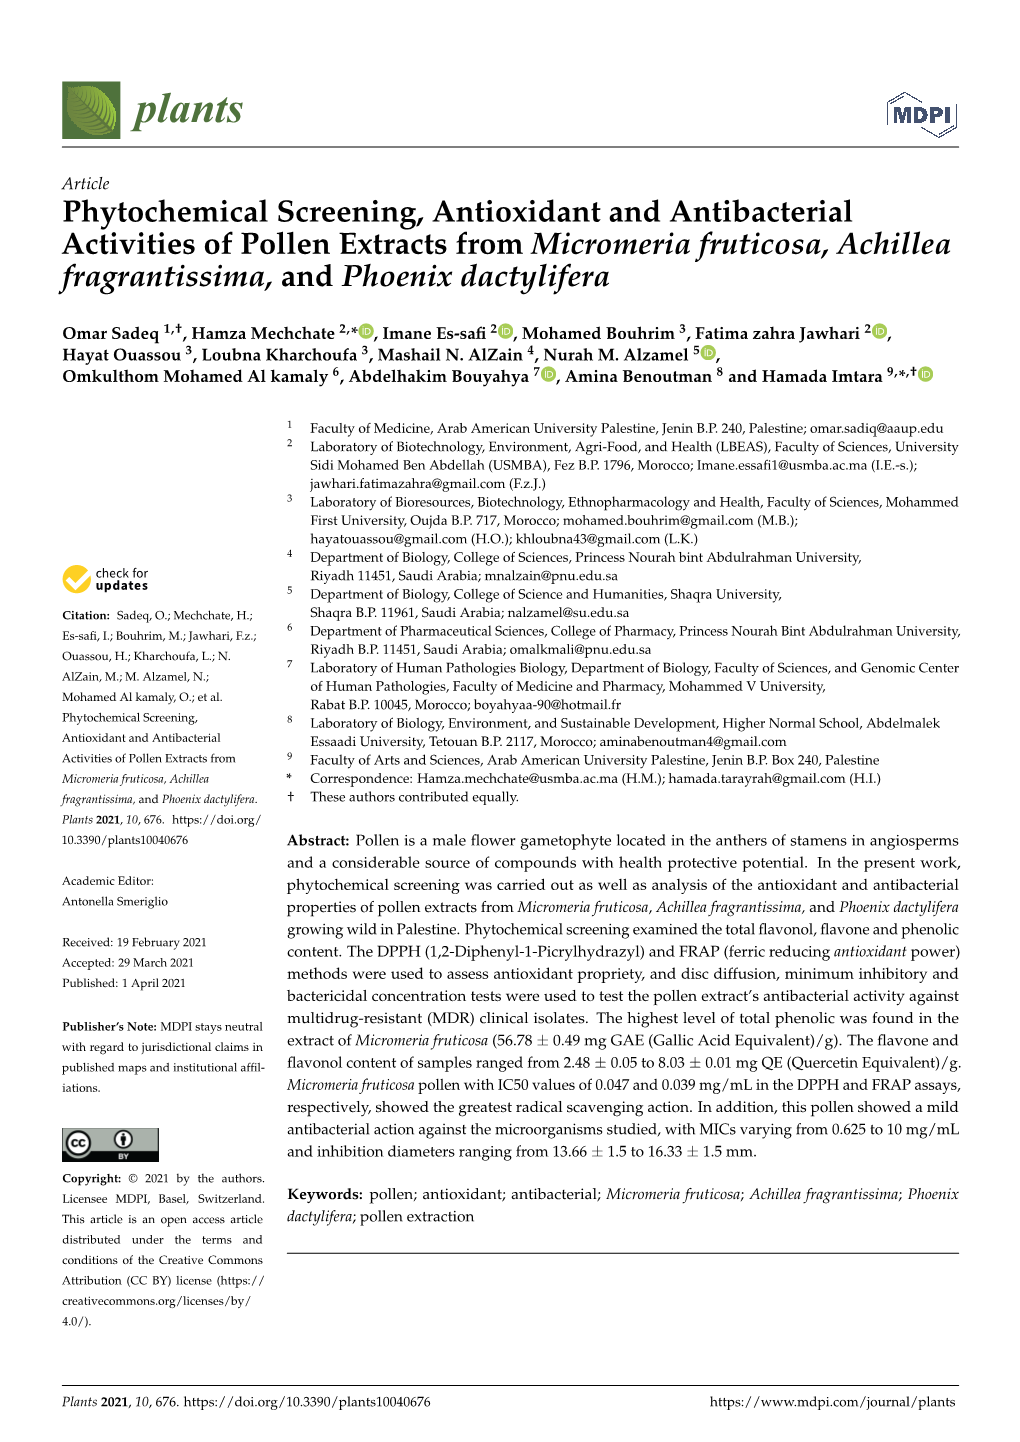 Phytochemical Screening, Antioxidant and Antibacterial Activities of Pollen Extracts from Micromeria Fruticosa, Achillea Fragrantissima, and Phoenix Dactylifera